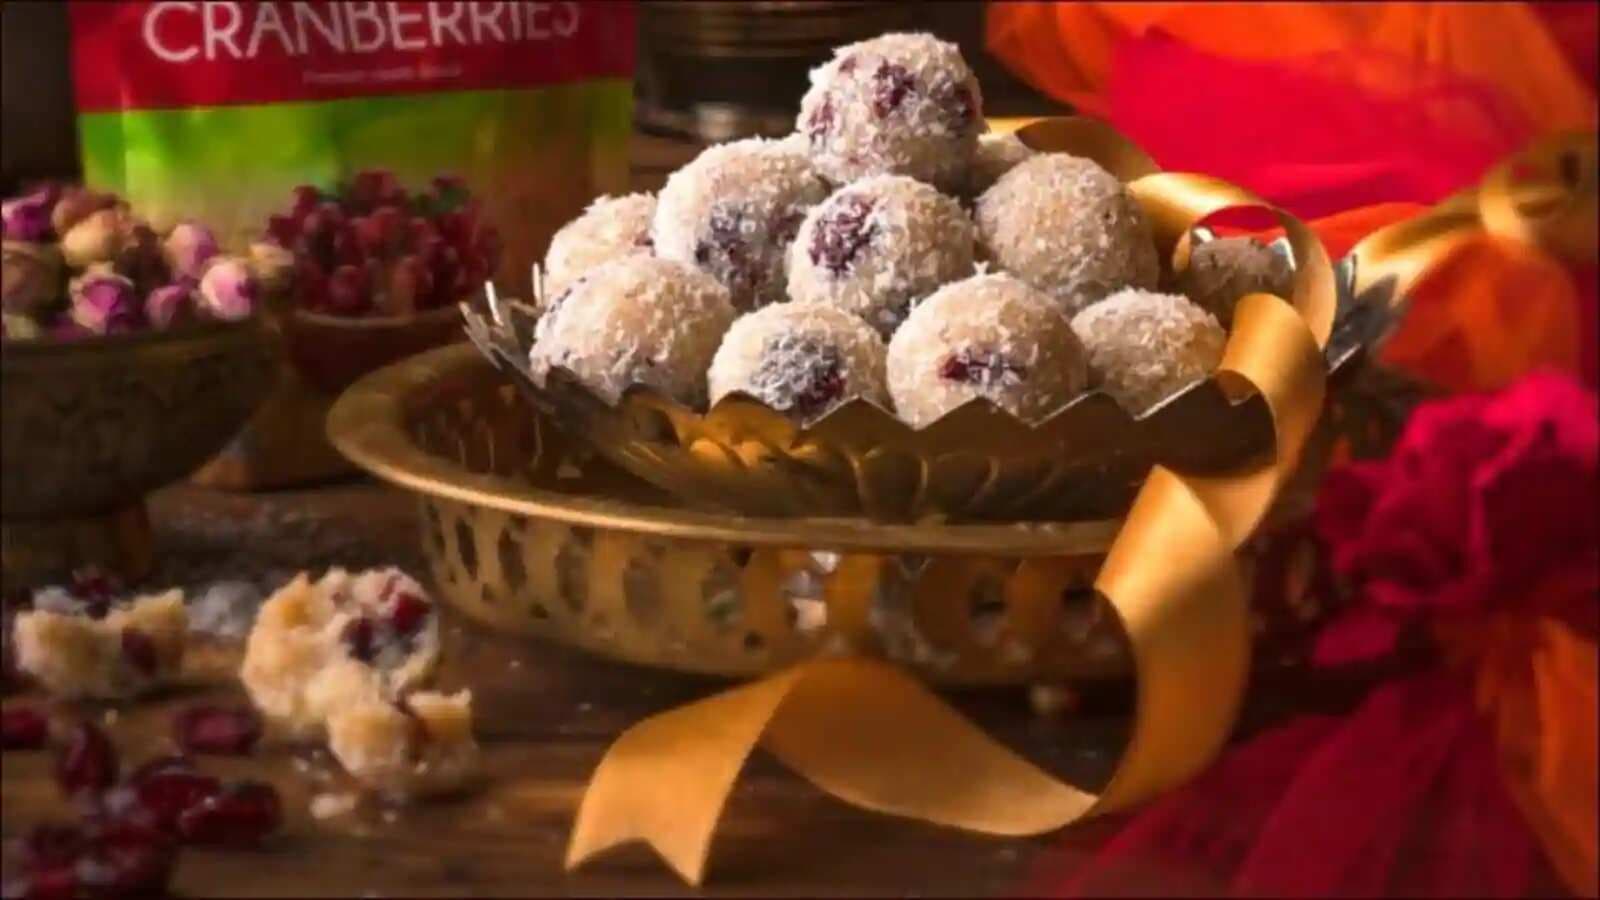 Recipe: Whip up some cranberry coconut laddoos to make guests drool on Holi 2021